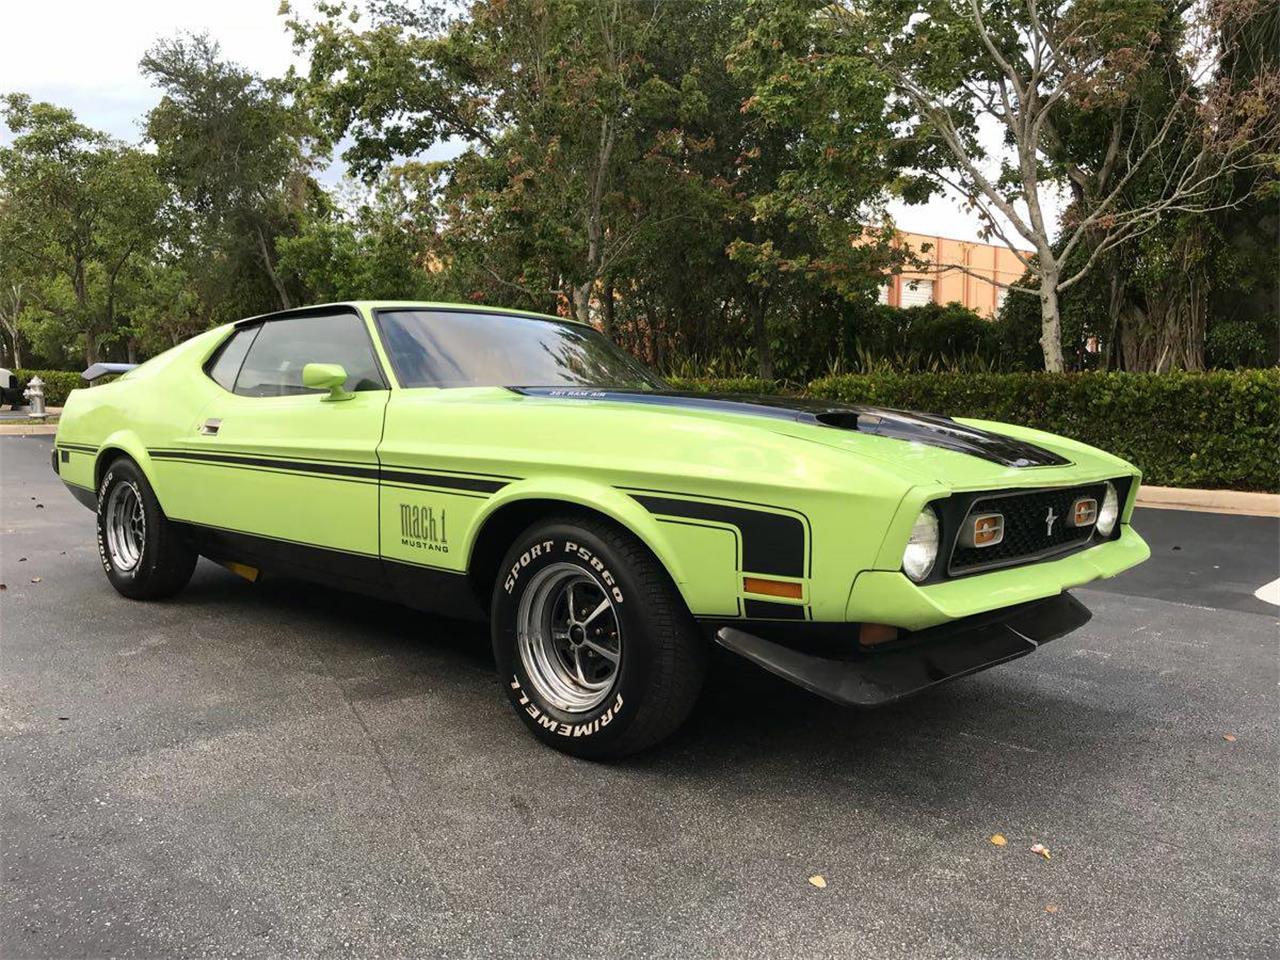 1971 Ford Mustang Mach 1 for Sale | ClassicCars.com | CC-1089643